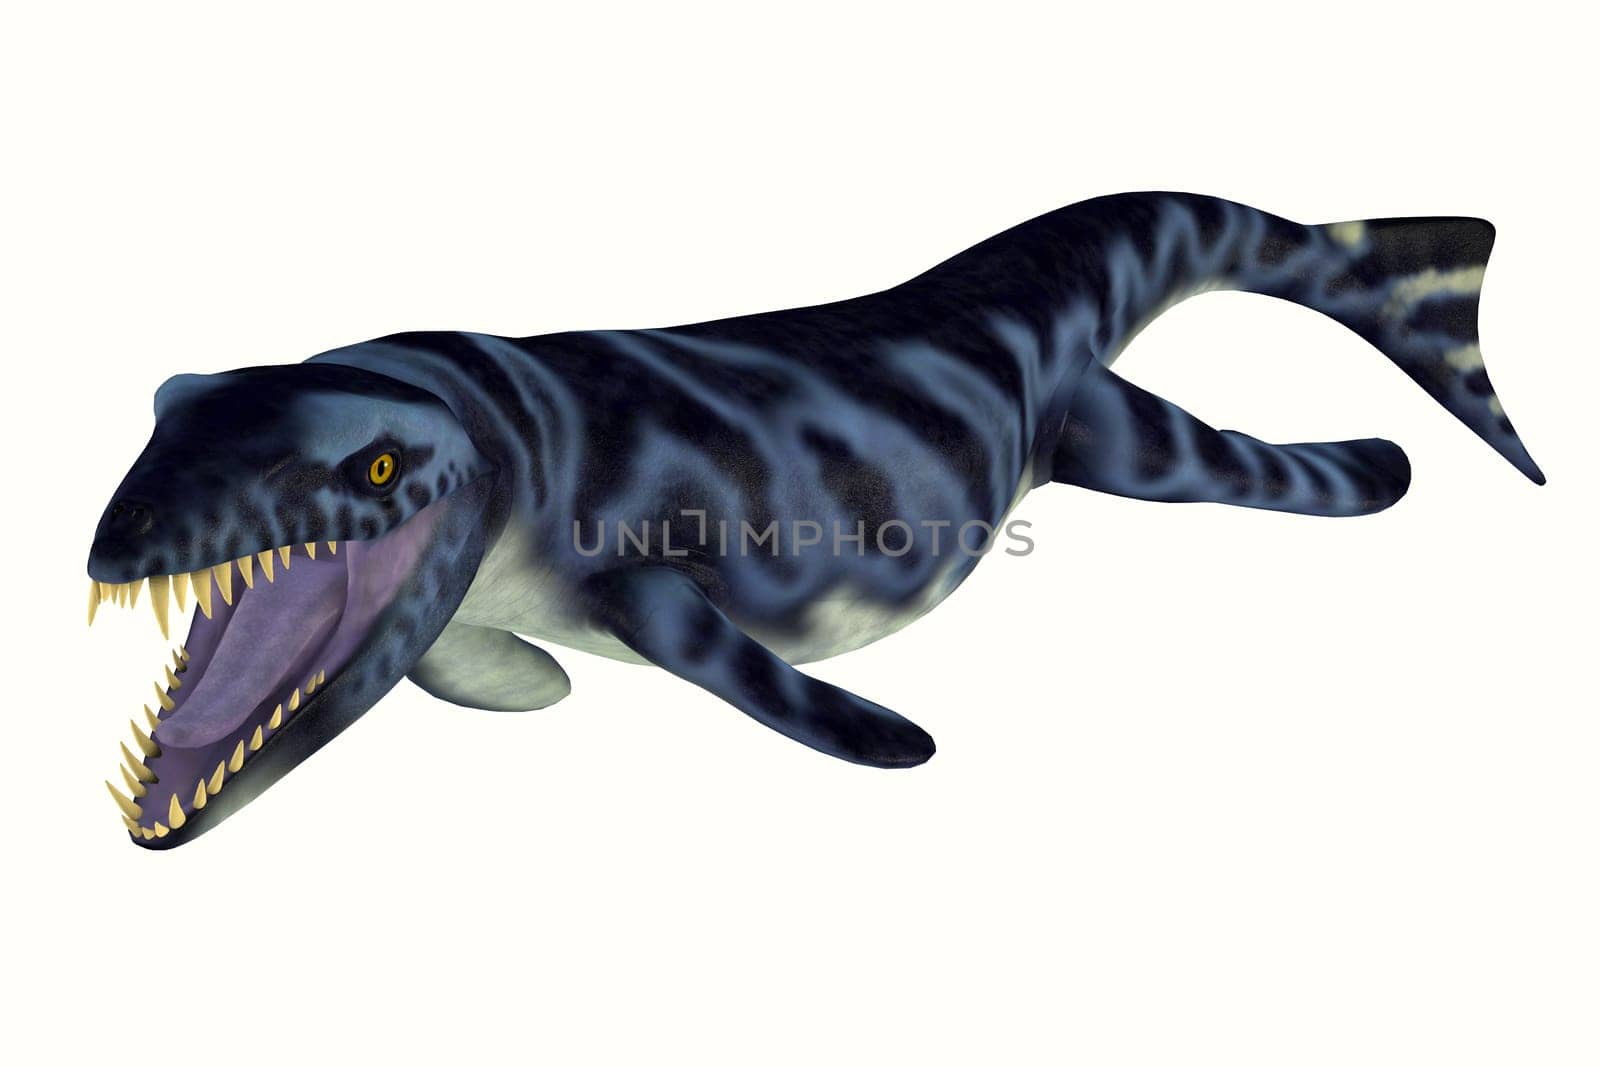 Dakosaurus was a marine carnivorous reptile that lived in the seas of Europe, Mexico and Argentina during the Jurassic and Cretaceous Periods.